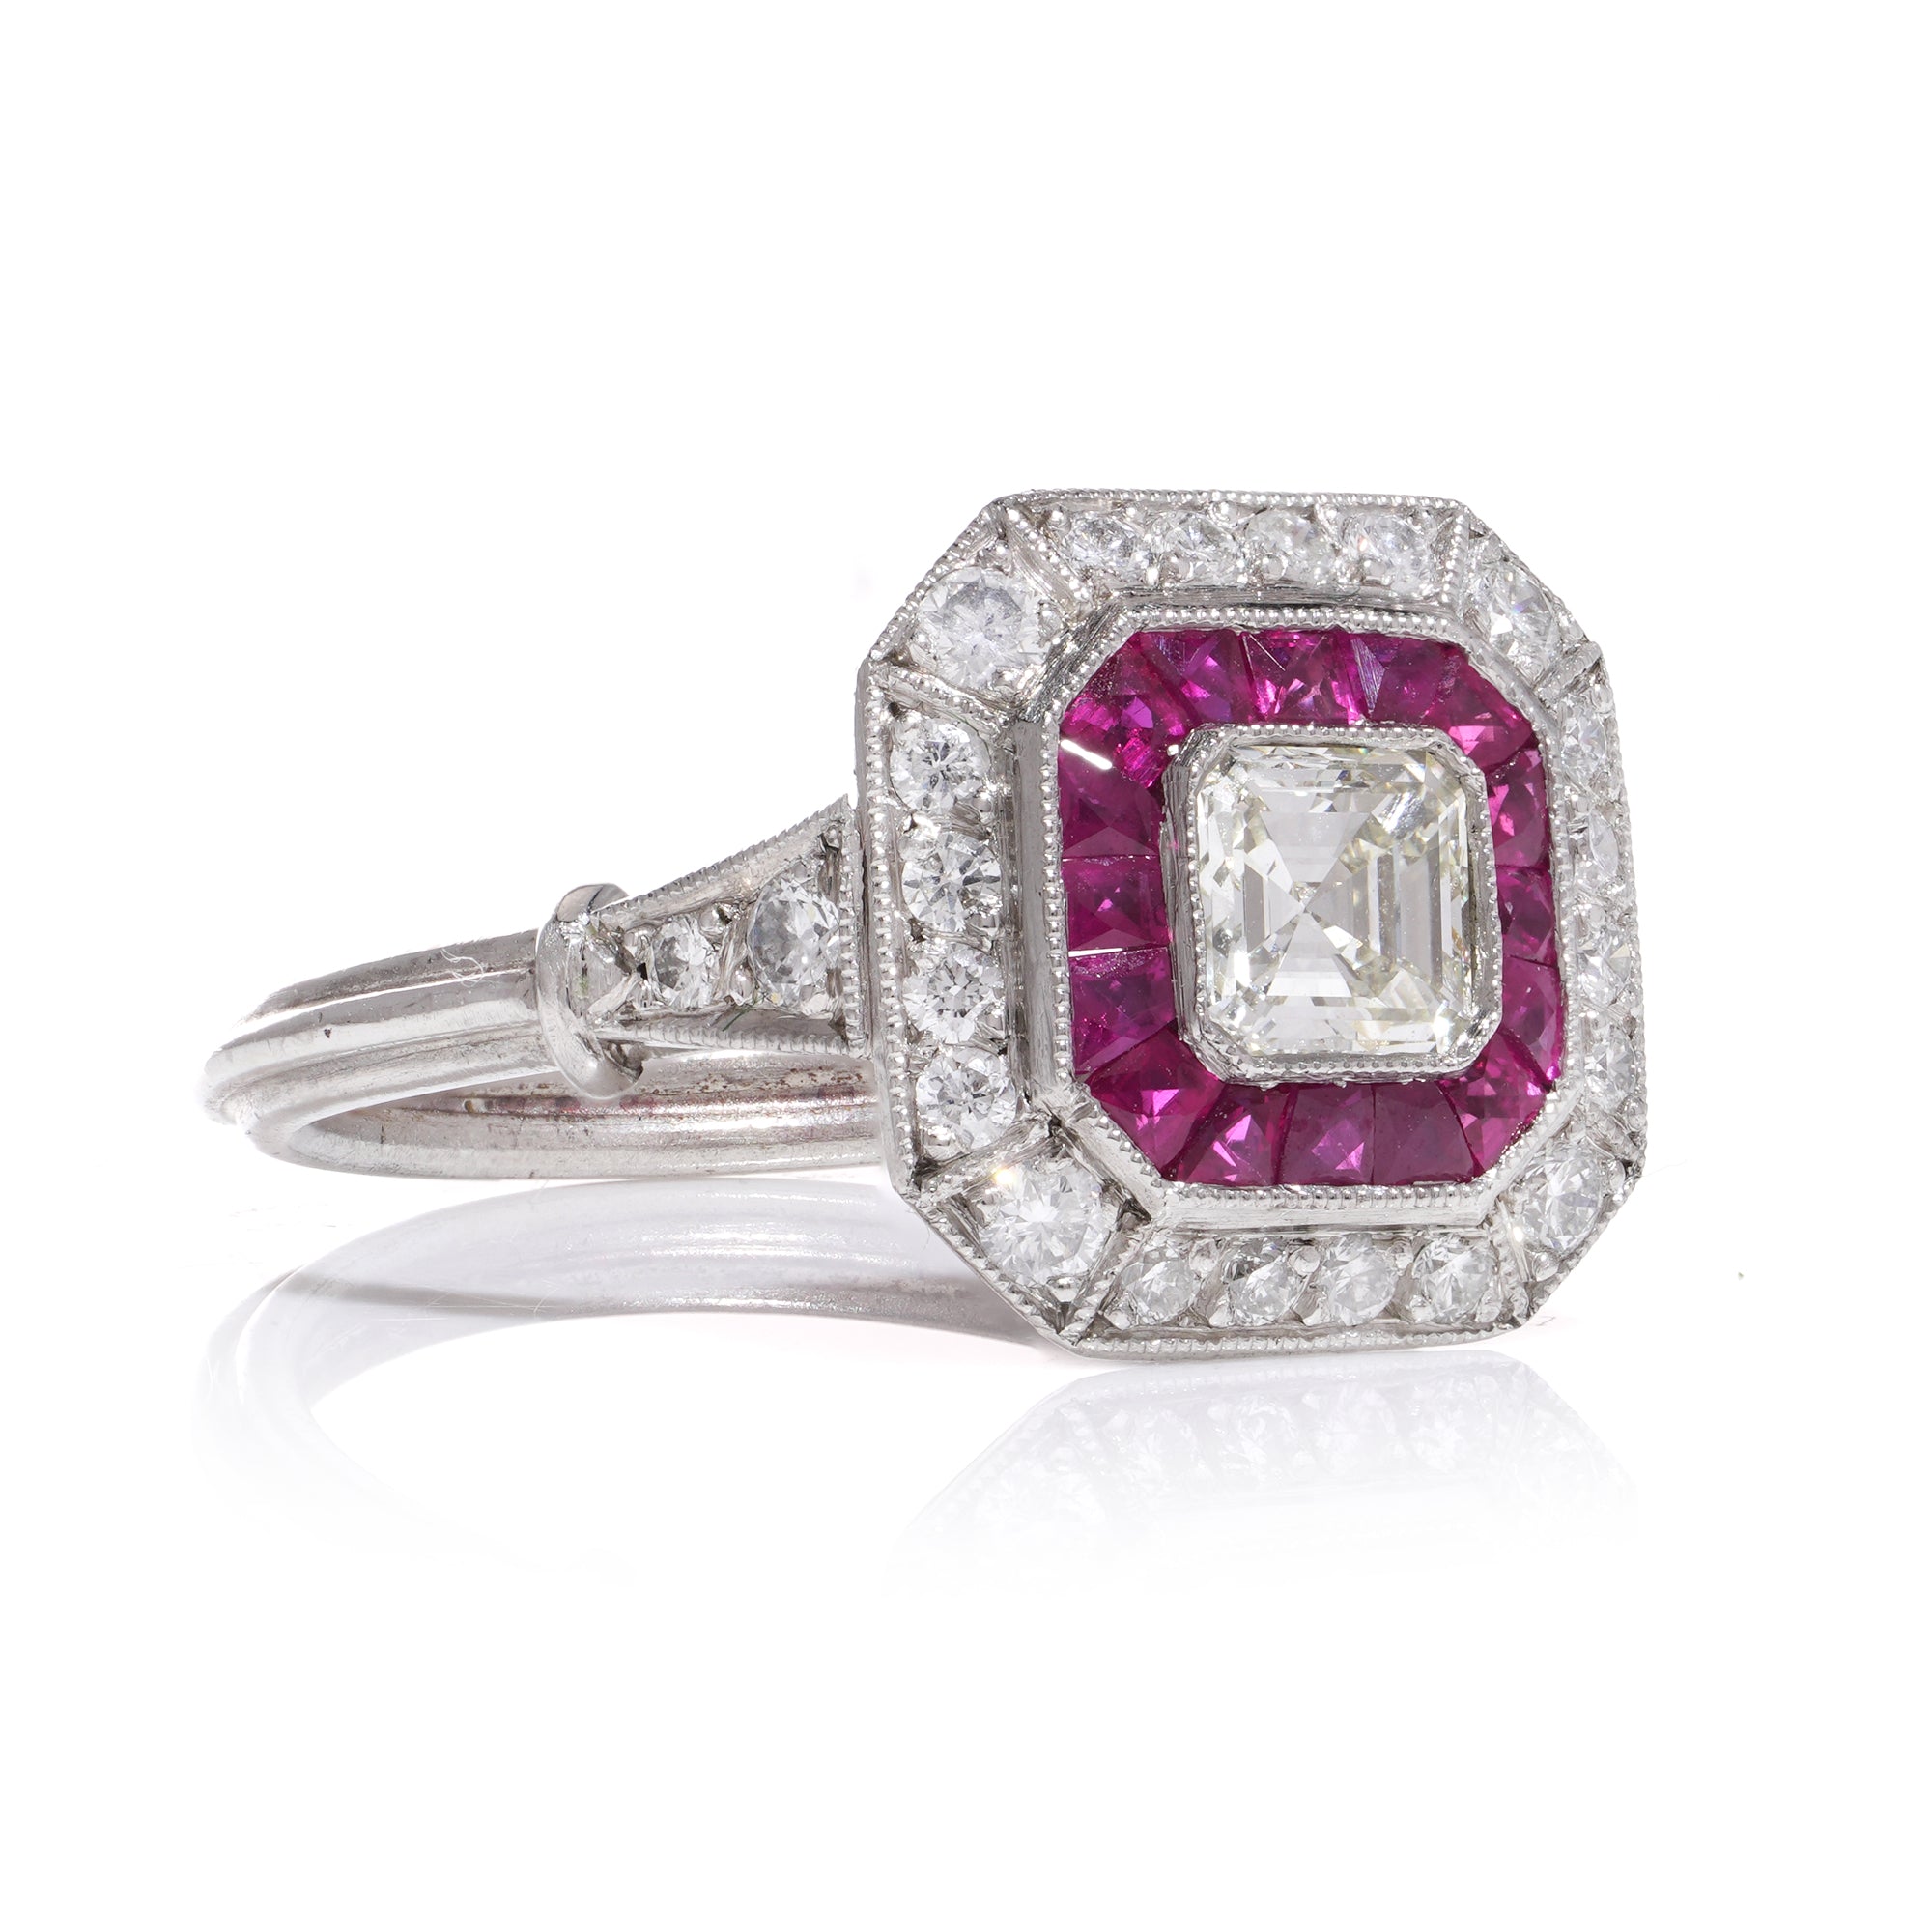 0.55ct Asscher Cut Diamond and Ruby Art Deco Revival Ring - Wildsmith Jewellery